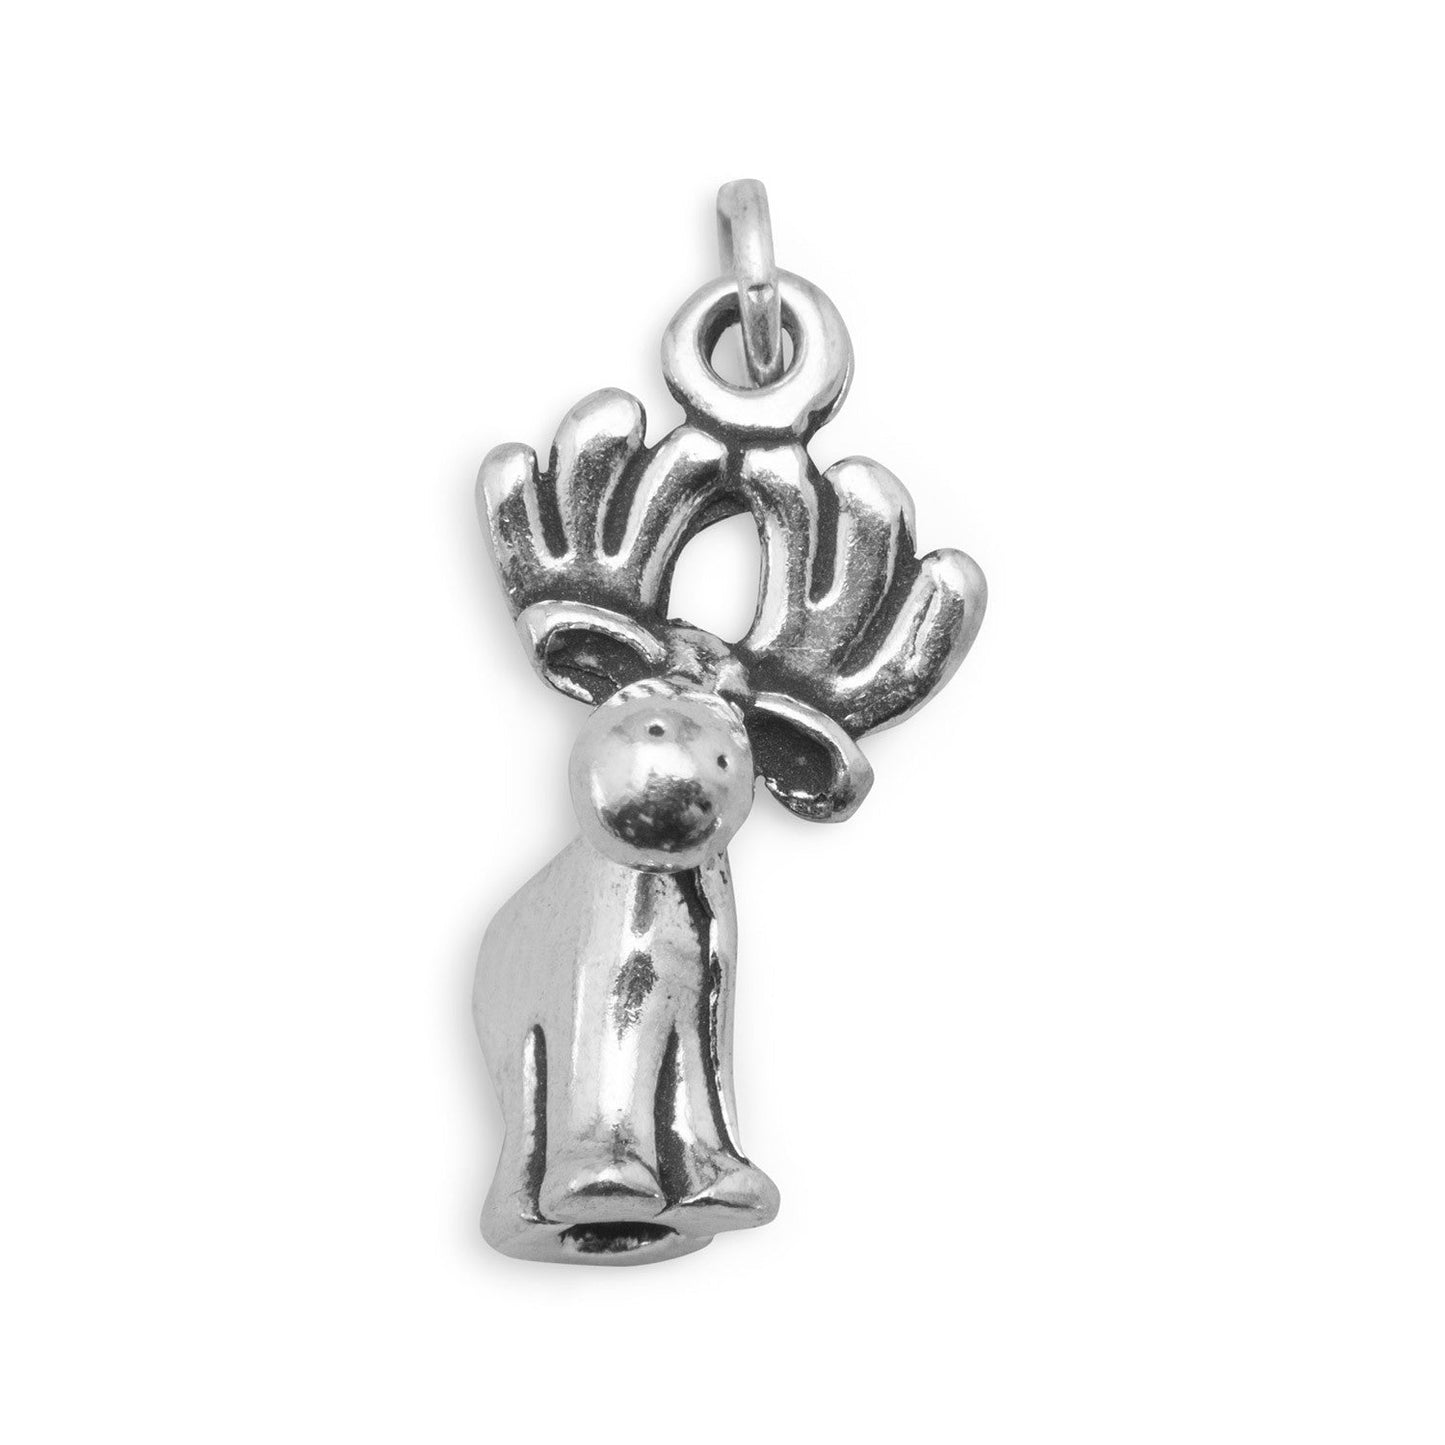 Oxidized Sterling Silver Cute Moose Charm, Made in USA